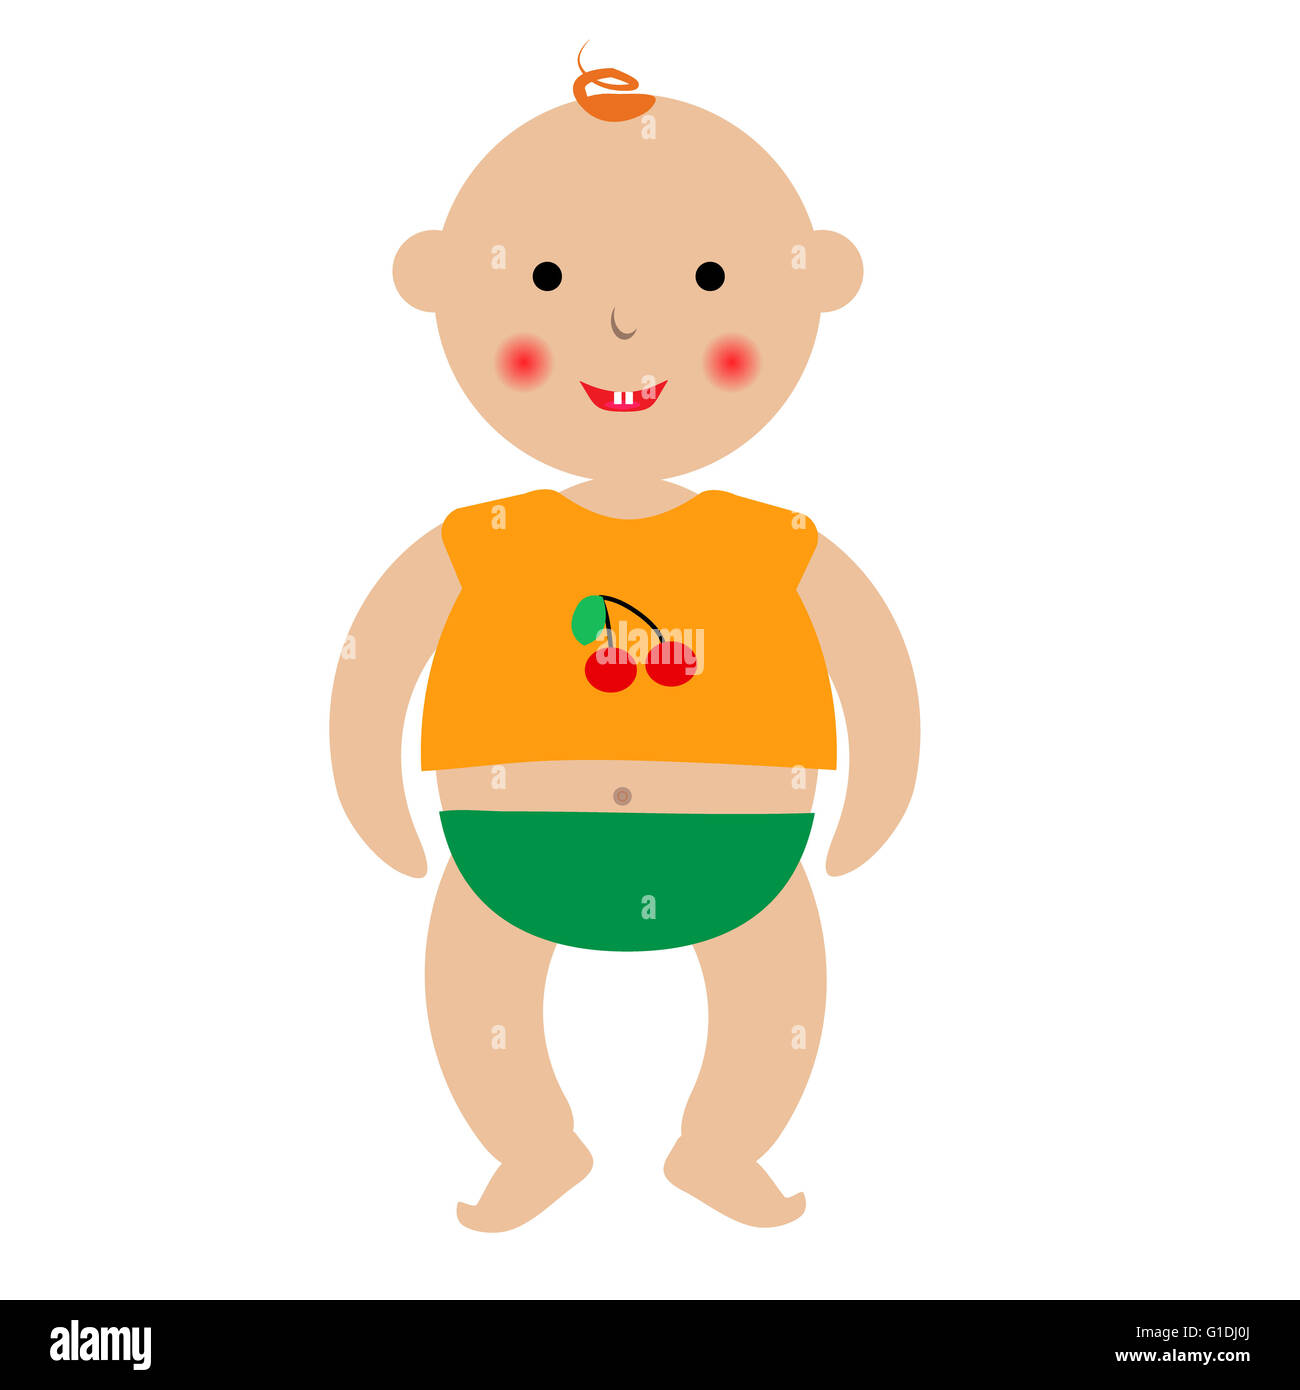 Standing cartoon baby. Laughing baby standing in t-shirt and pants. Cartoon  baby drawing for illustration Stock Photo - Alamy